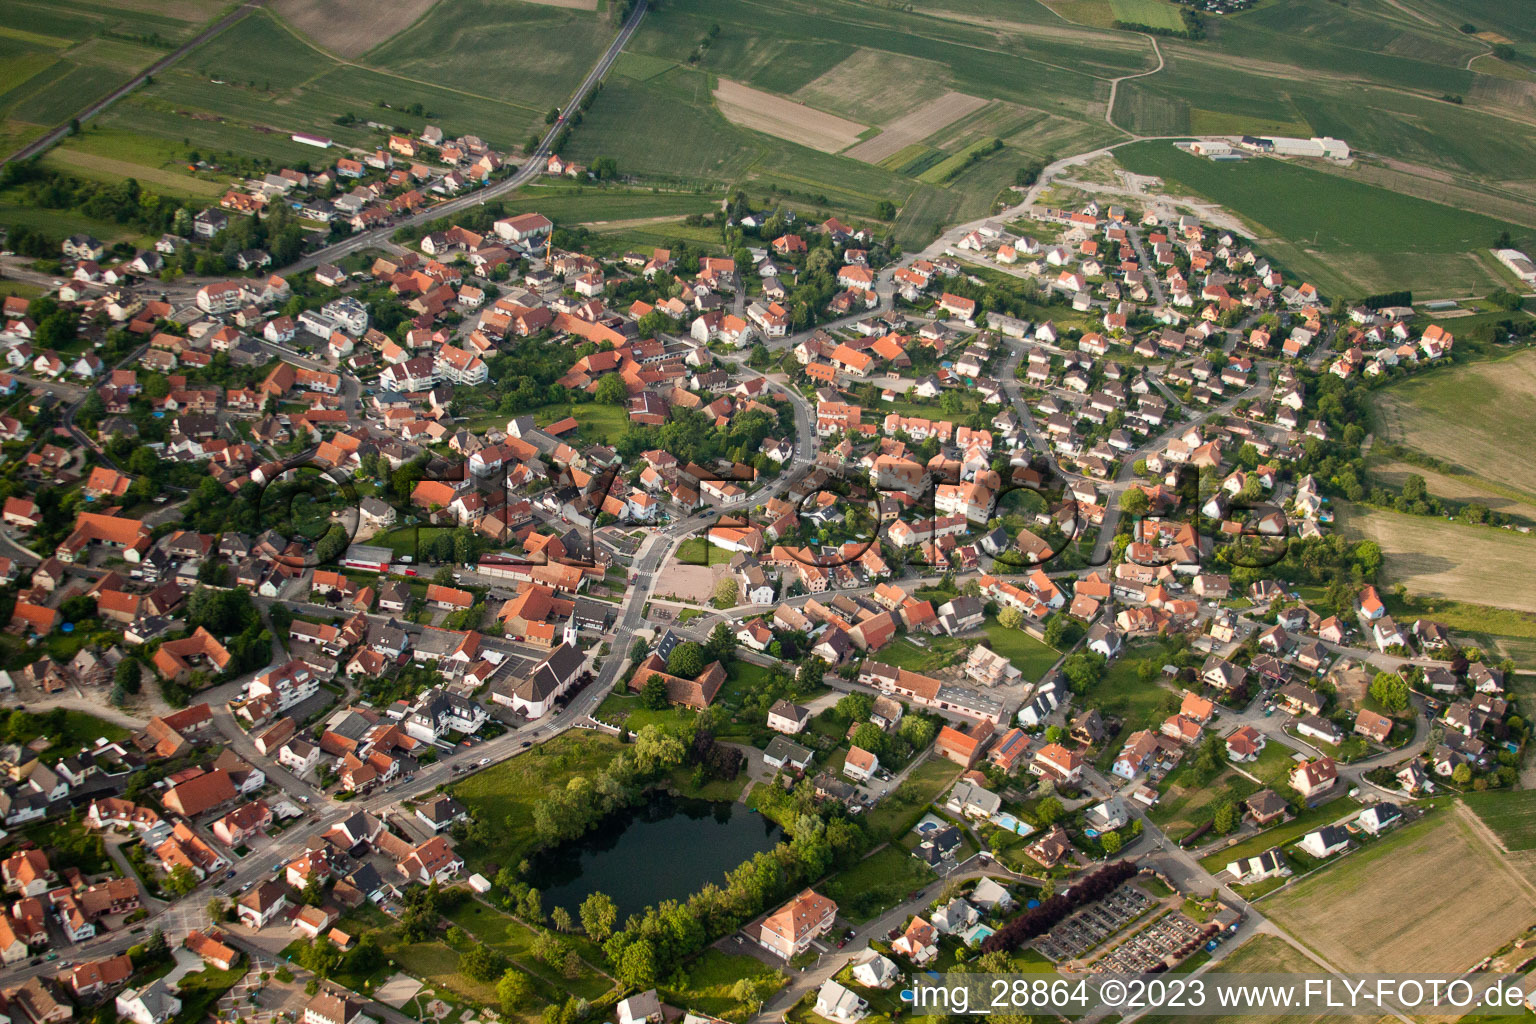 Kilstett in the state Bas-Rhin, France out of the air